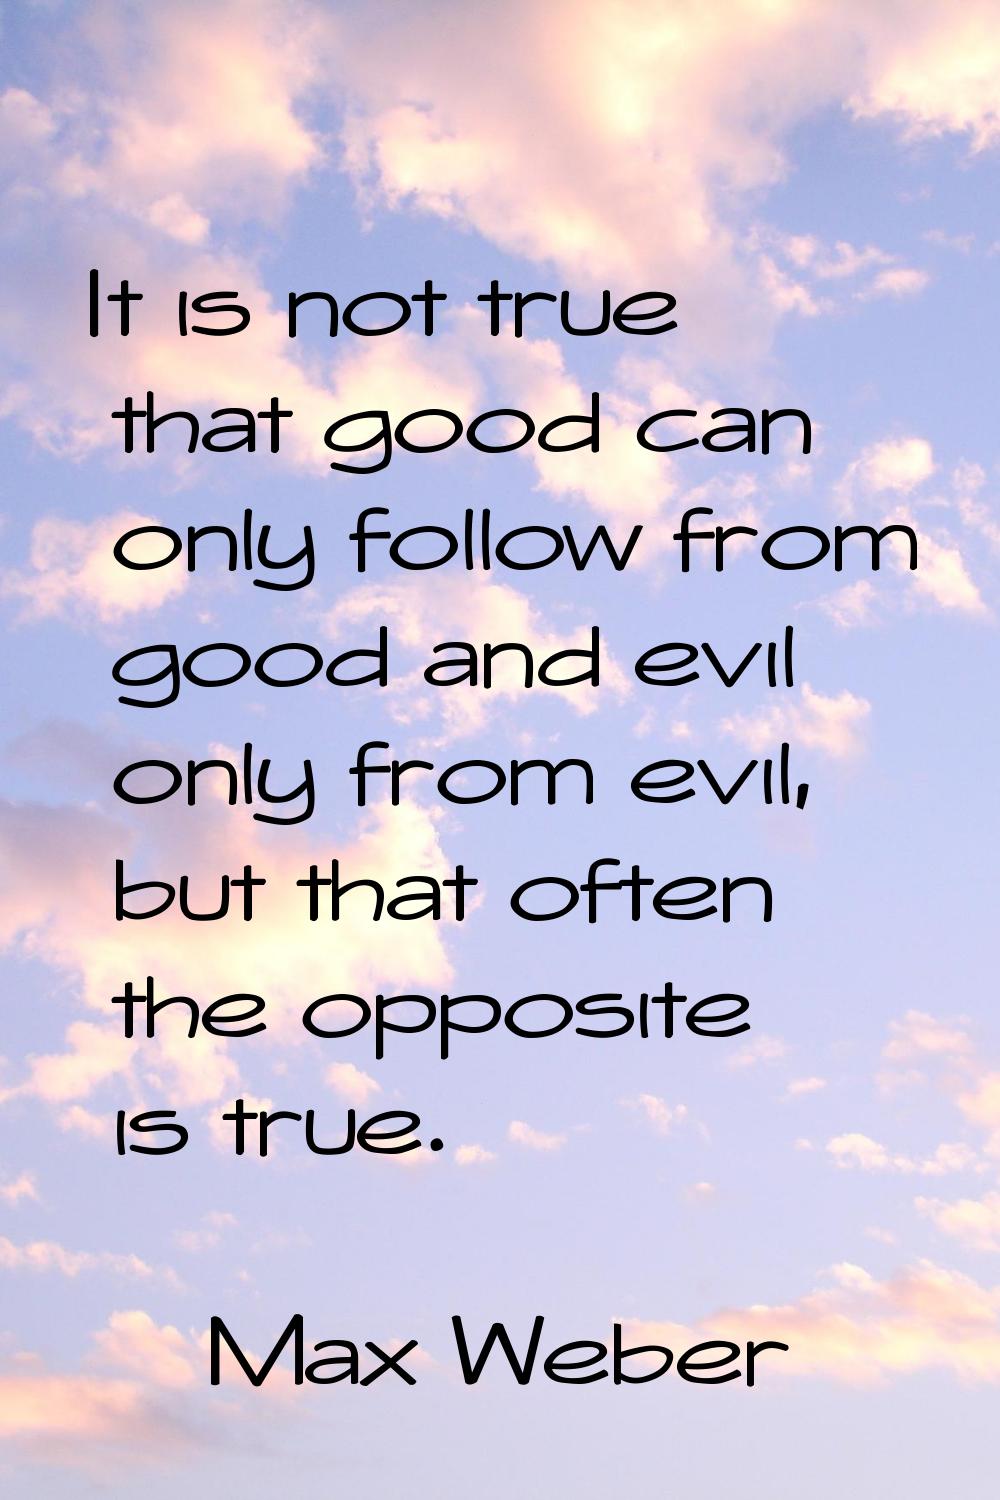 It is not true that good can only follow from good and evil only from evil, but that often the oppo